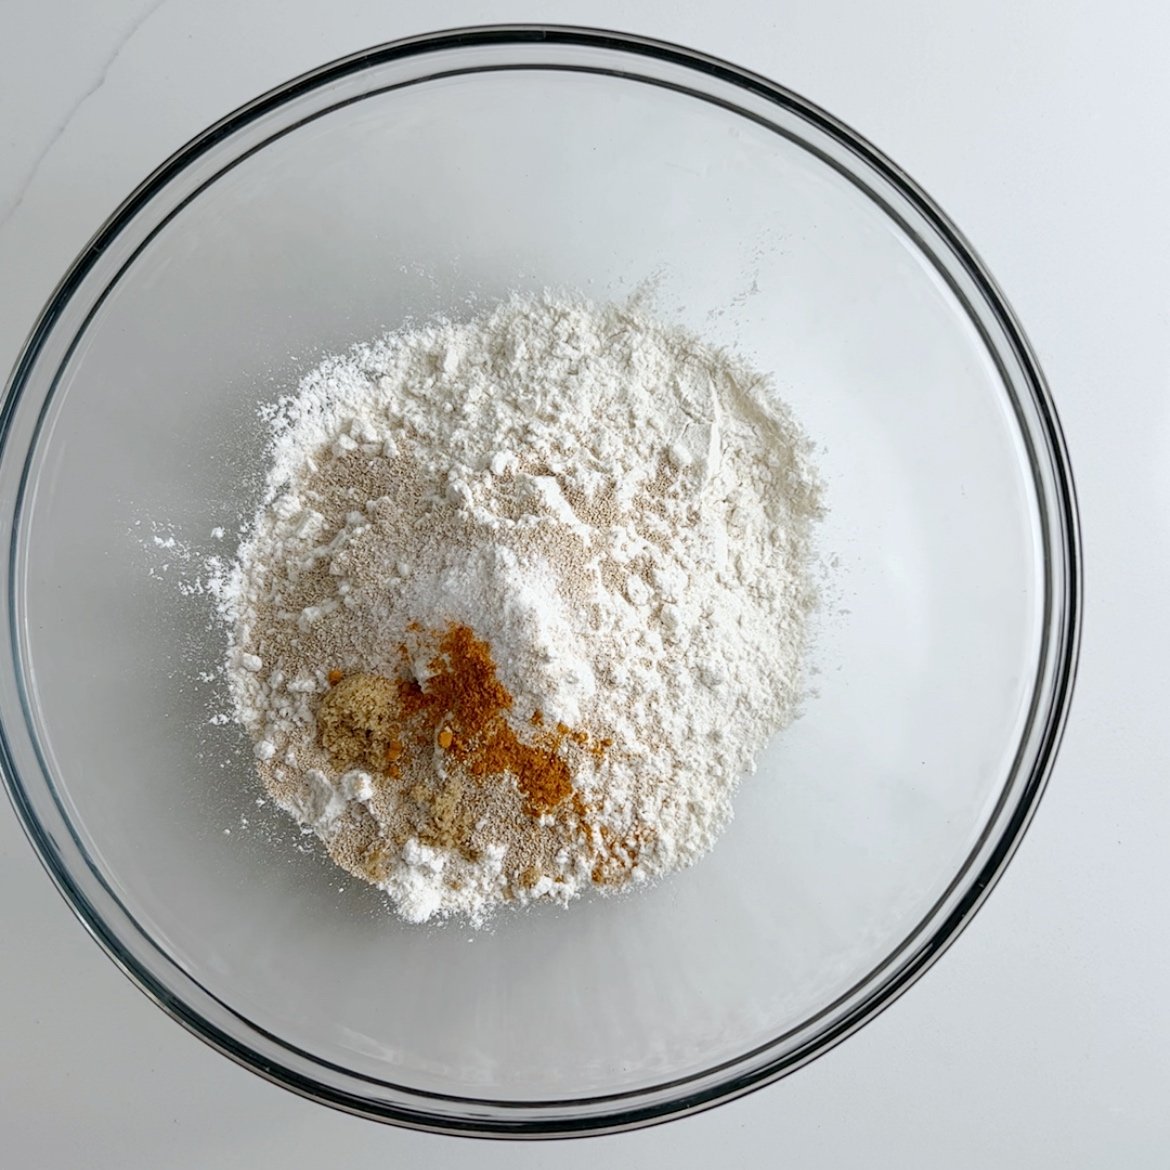 Gluten free flour, yeast, salt, sugar in a glass mixing bowl on a white marble surface